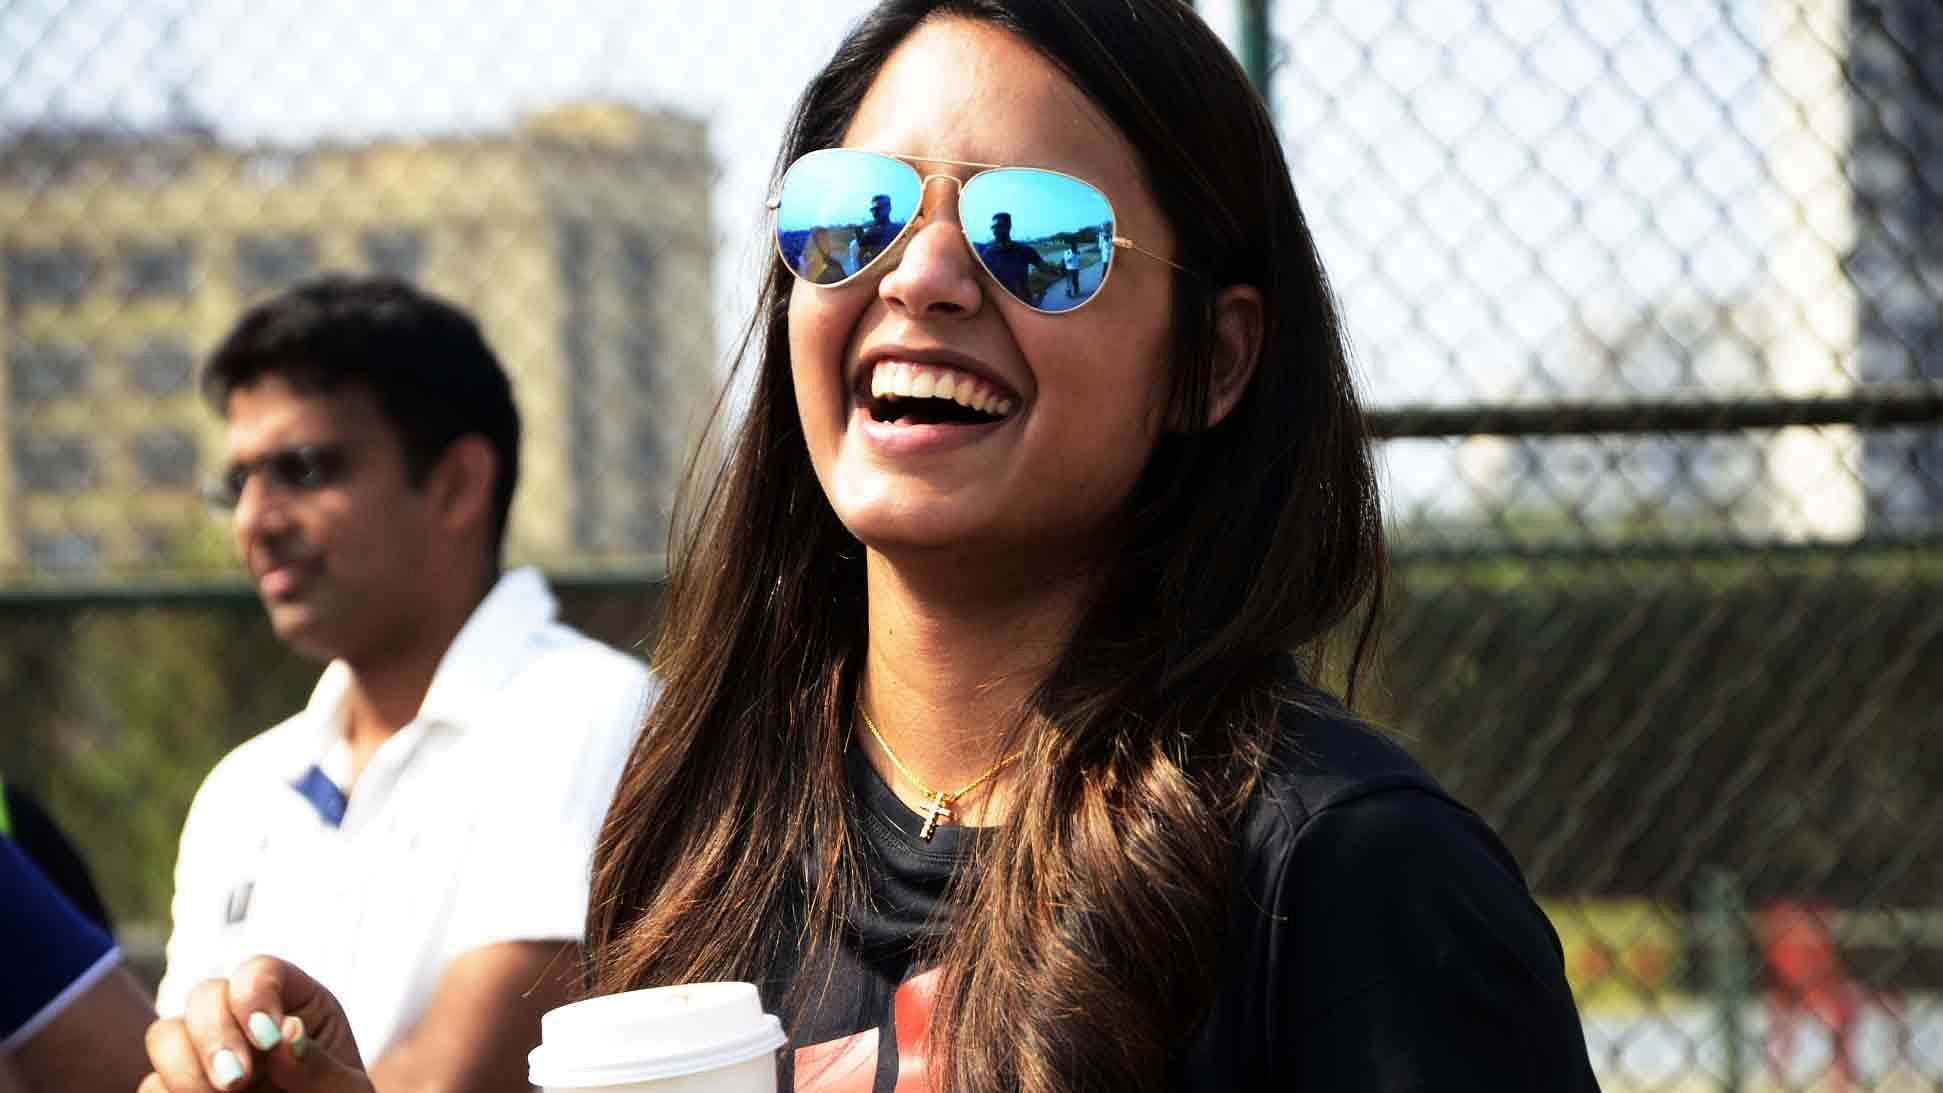 Dipika Pallikal is the first Indian to break into the top 10 in the WSA rankings. (Photo: IANS)